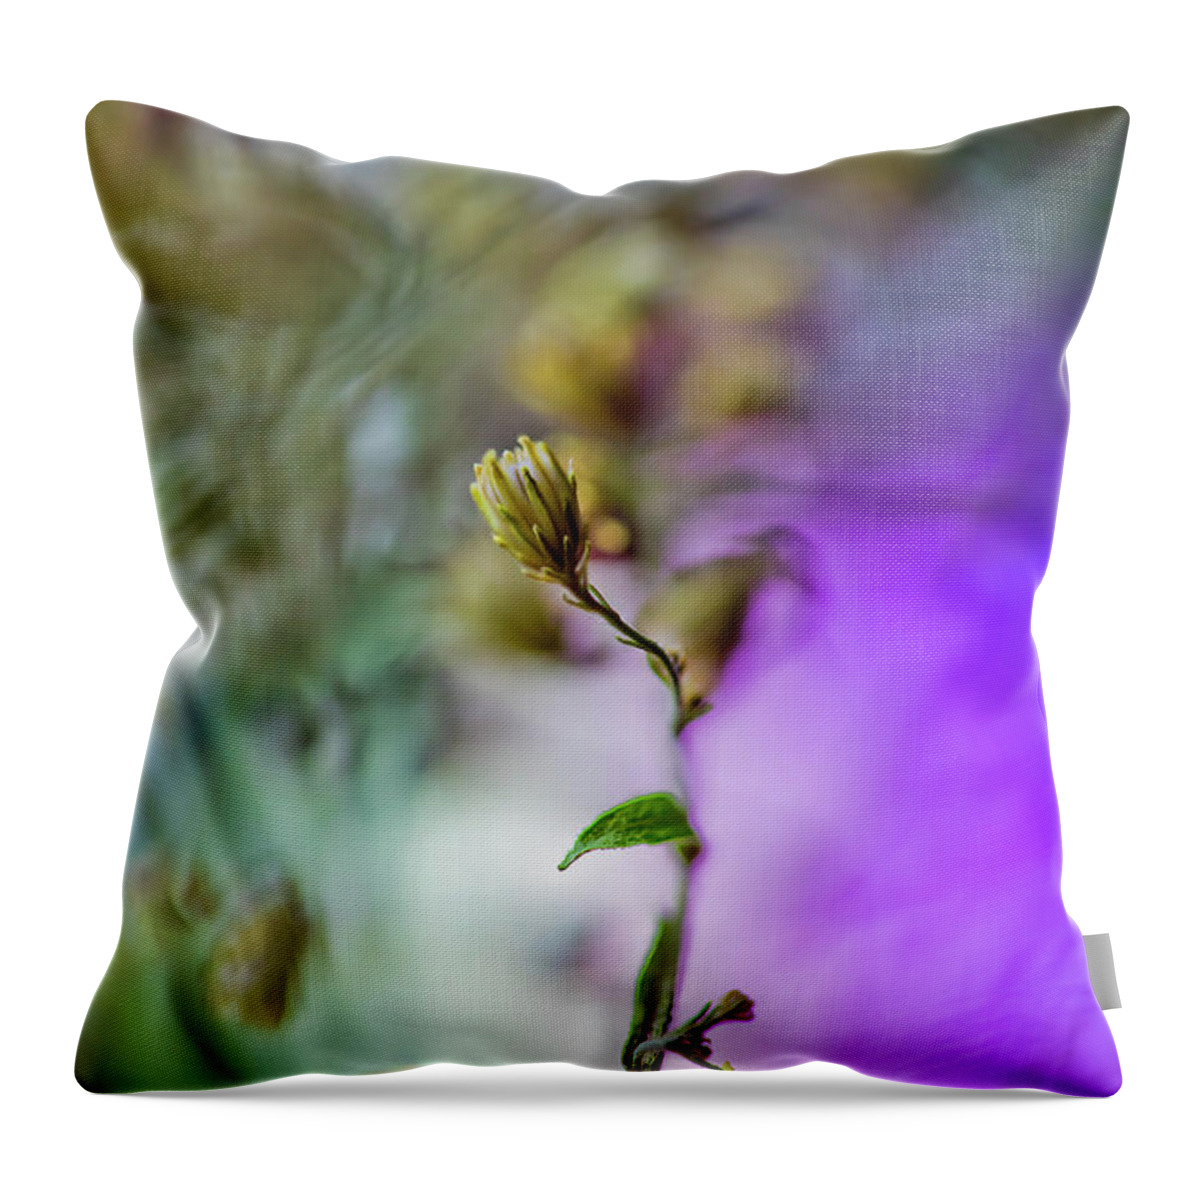 Abstract Flower Photograph Throw Pillow featuring the photograph Self Isolated by Az Jackson